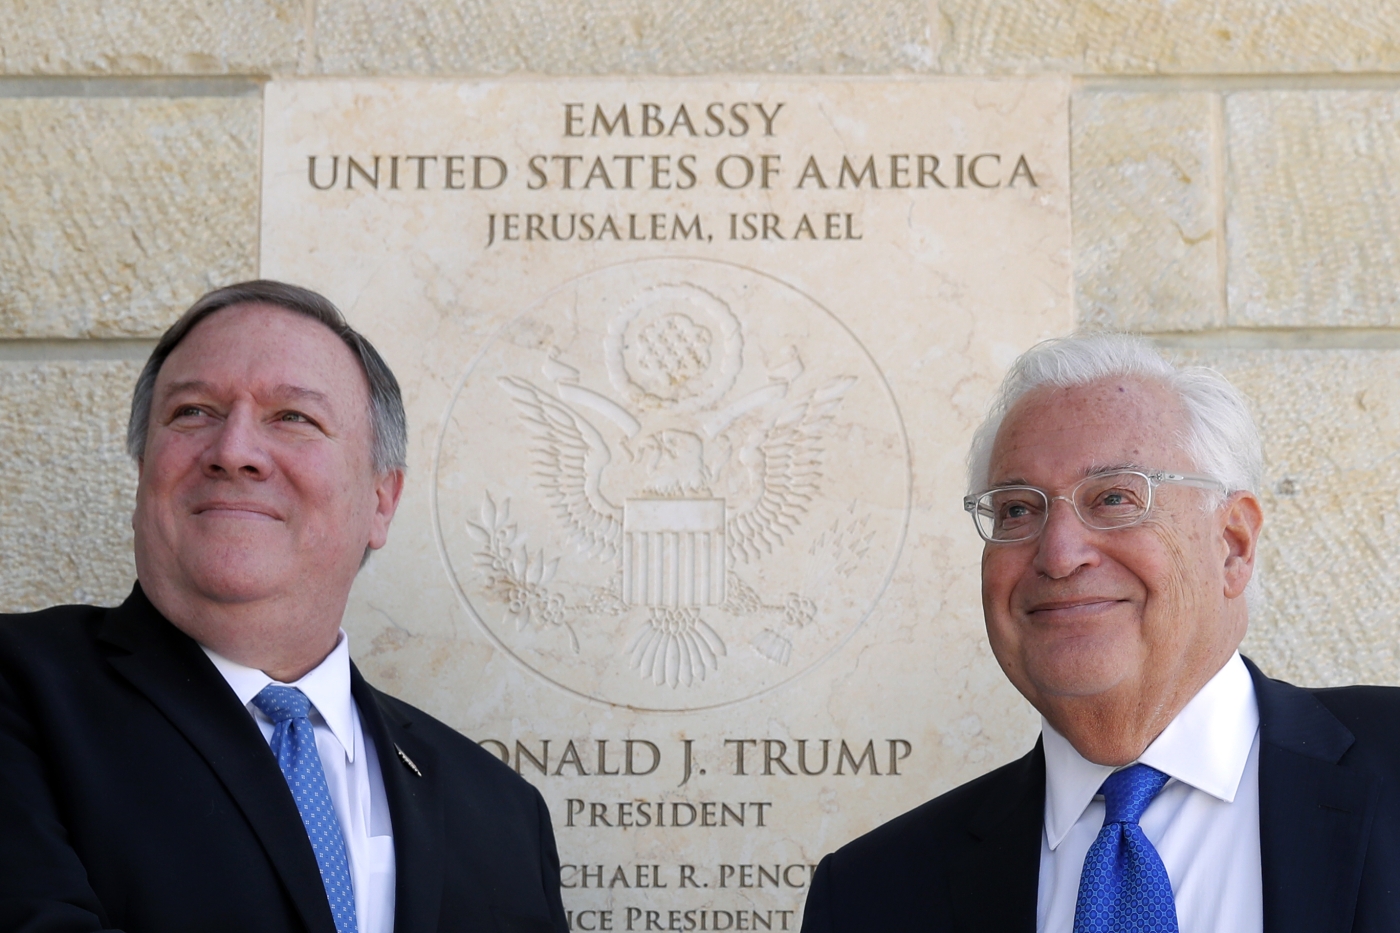 us_secretary_of_state_mike_pompeo_l_and_us_ambassador_to_israel_david_friedman_stand_next_to_the_dedication_plaque_at_the_us_embassy_in_jerusalem_21_march_2019_afp.jpg